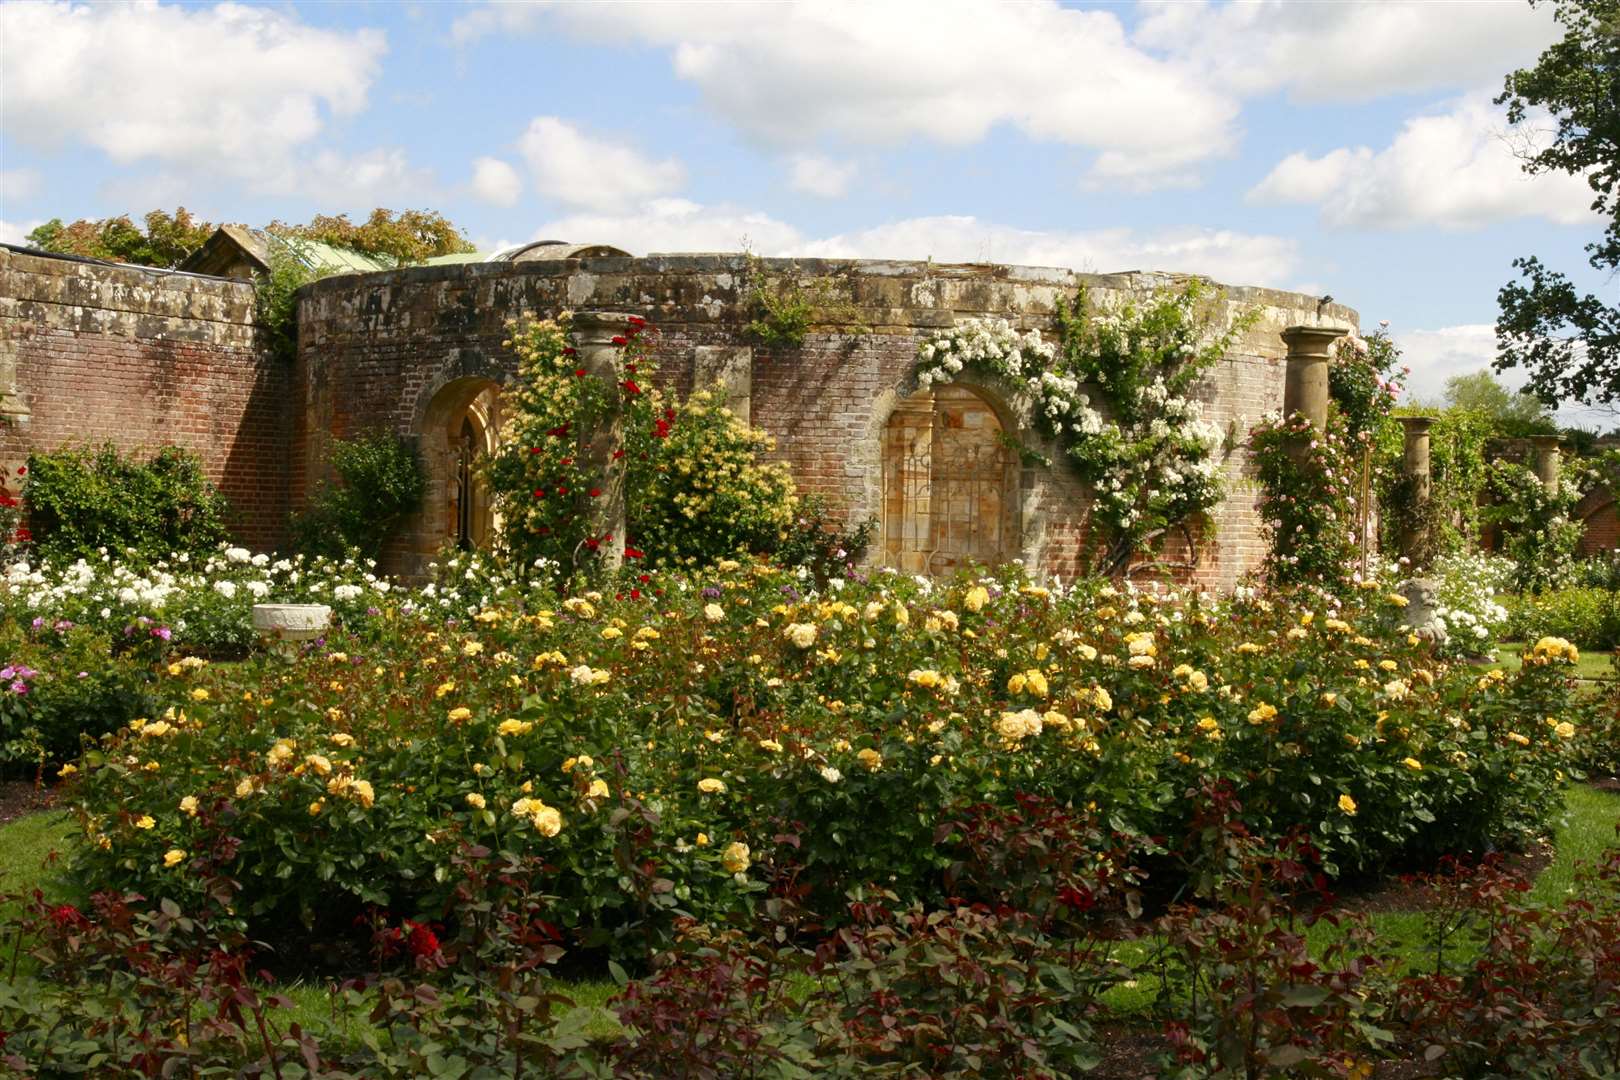 Explore the Hever Castle grounds as take in the flower displays and history of the castle. Picture: Vikki Rimmer